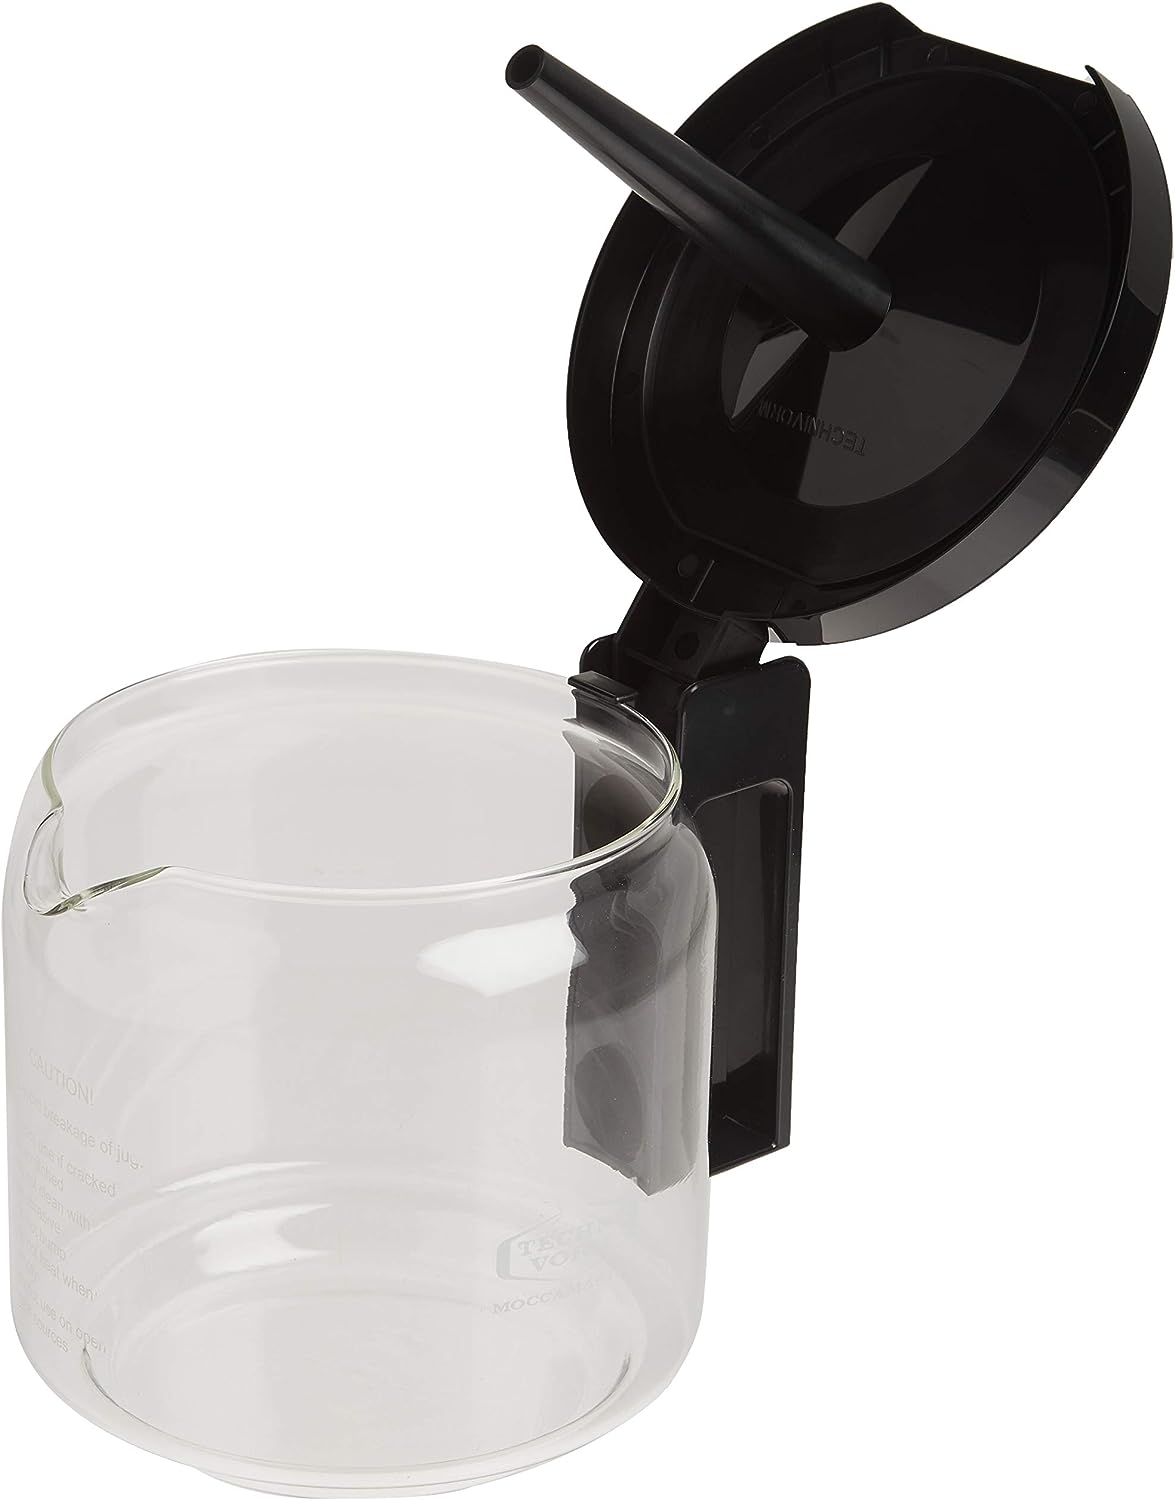 Technivorm Moccamaster 10-Cup Replacement Carafe